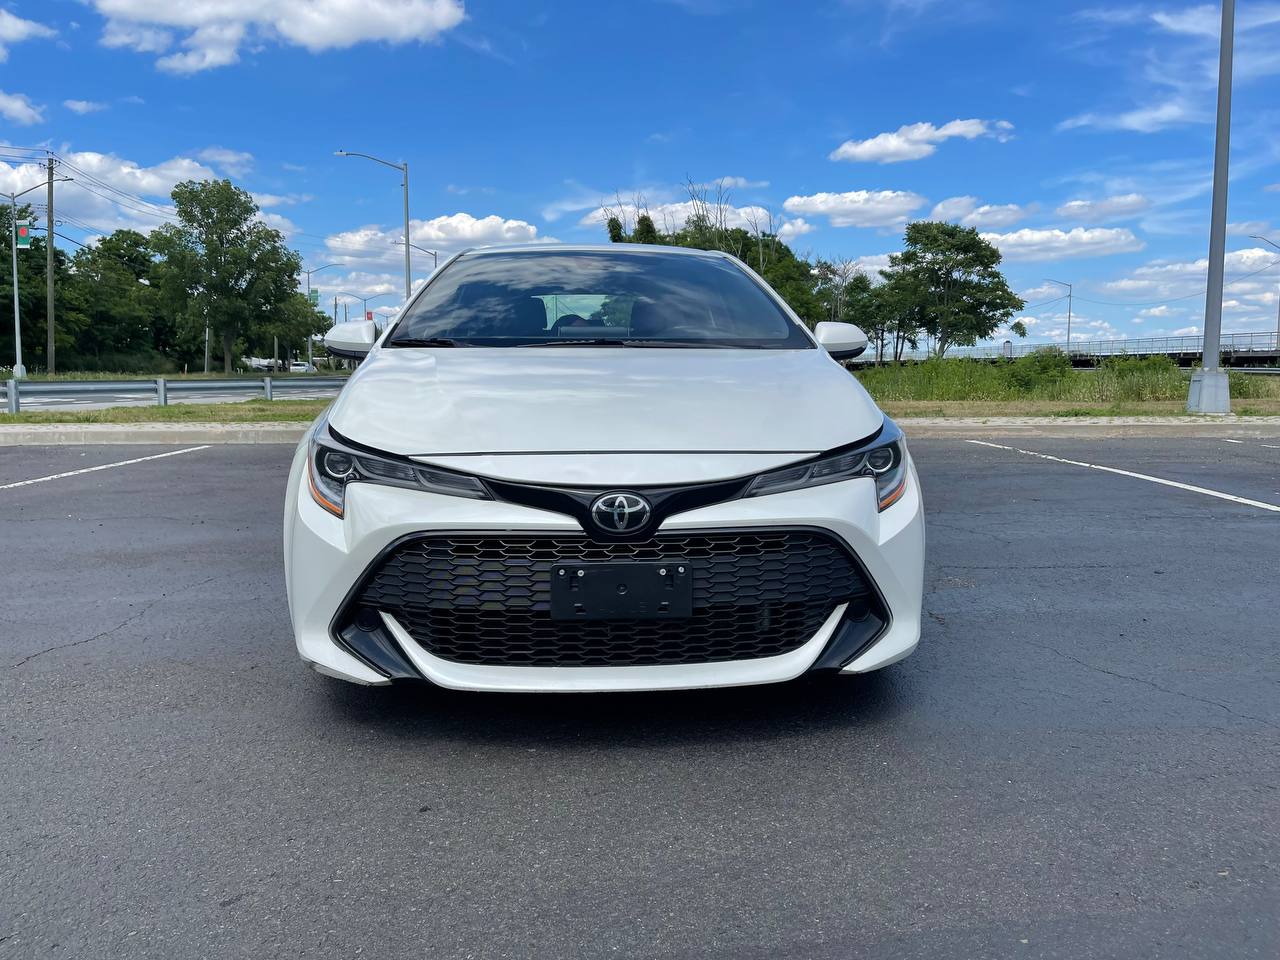 Used - Toyota Corolla SE Hatchback for sale in Staten Island NY